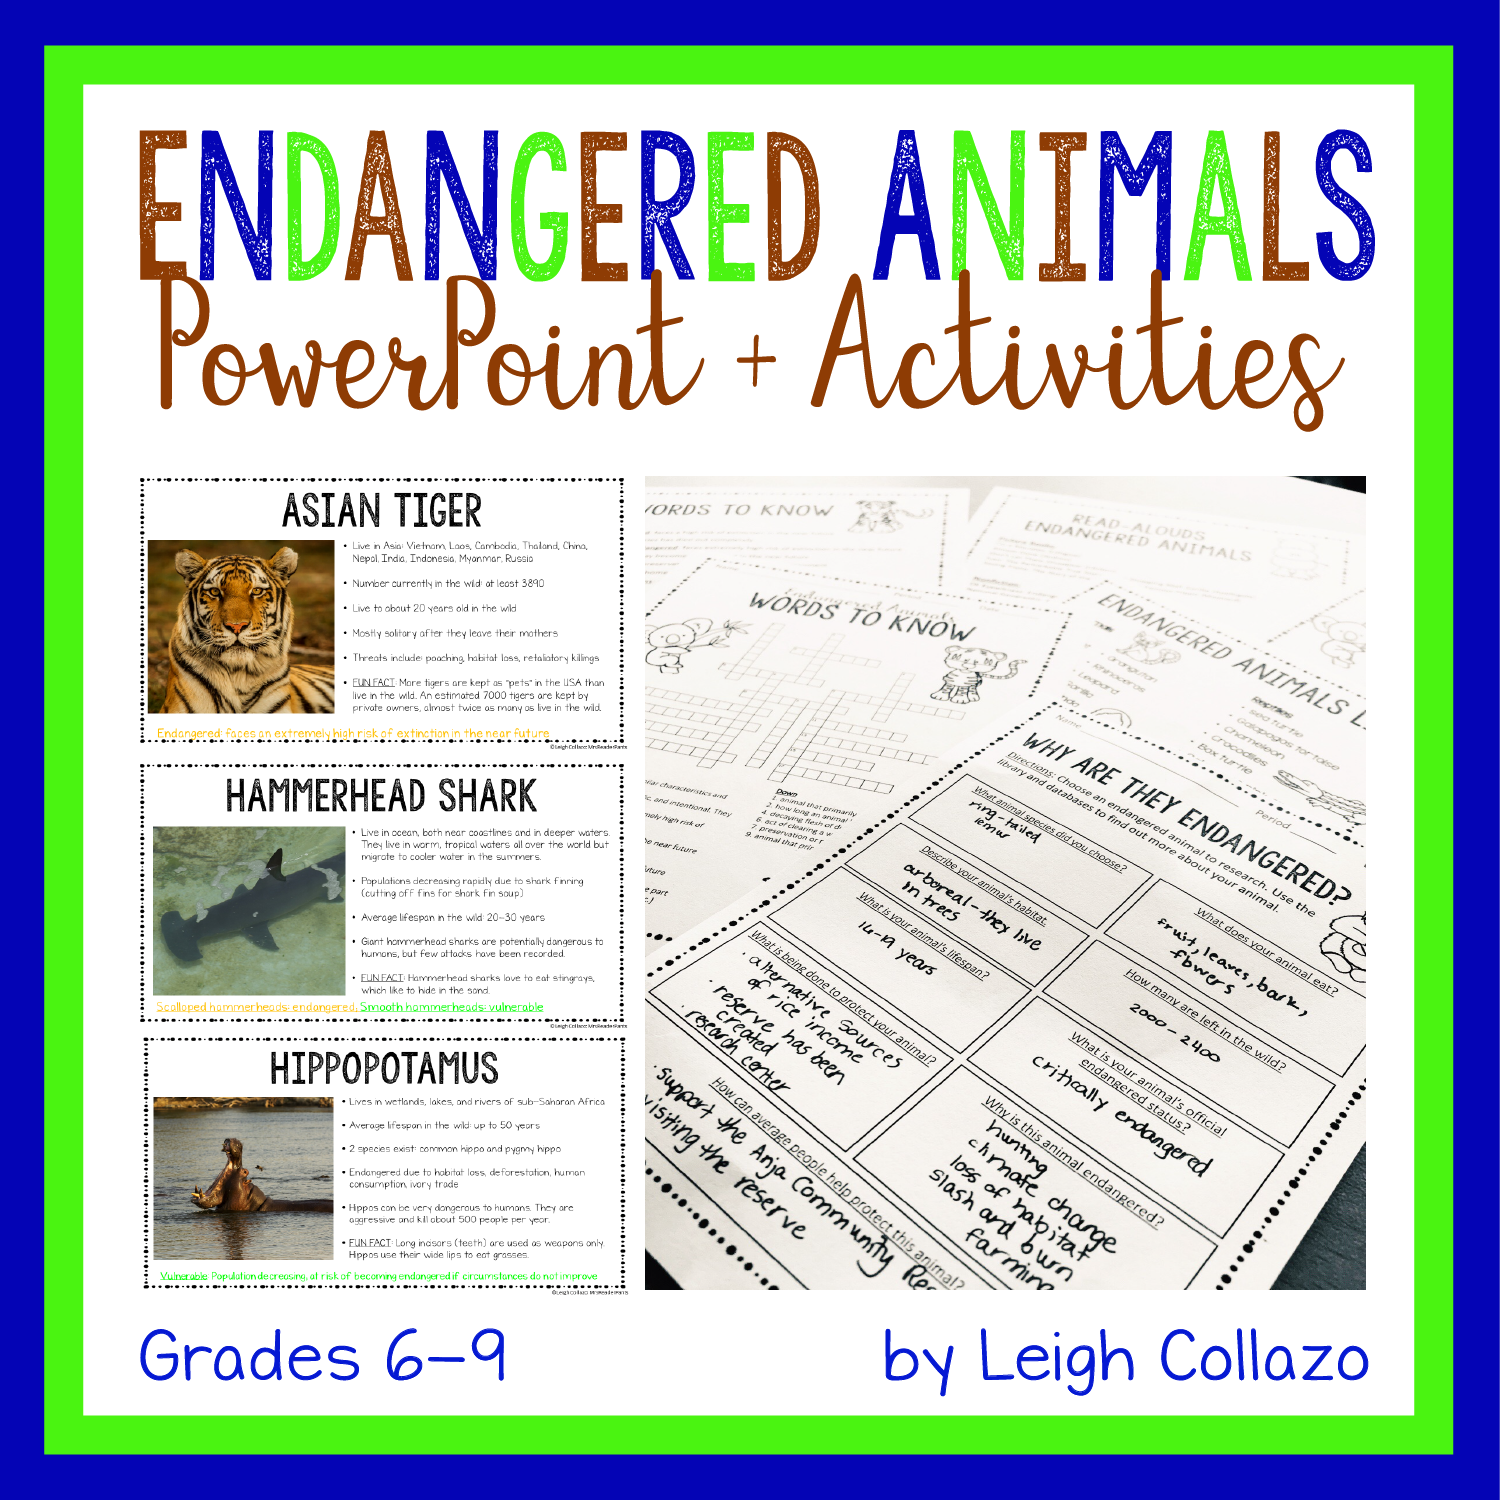 Endangered Animals PowerPoint and Research Activity - Mrs. ReaderPants